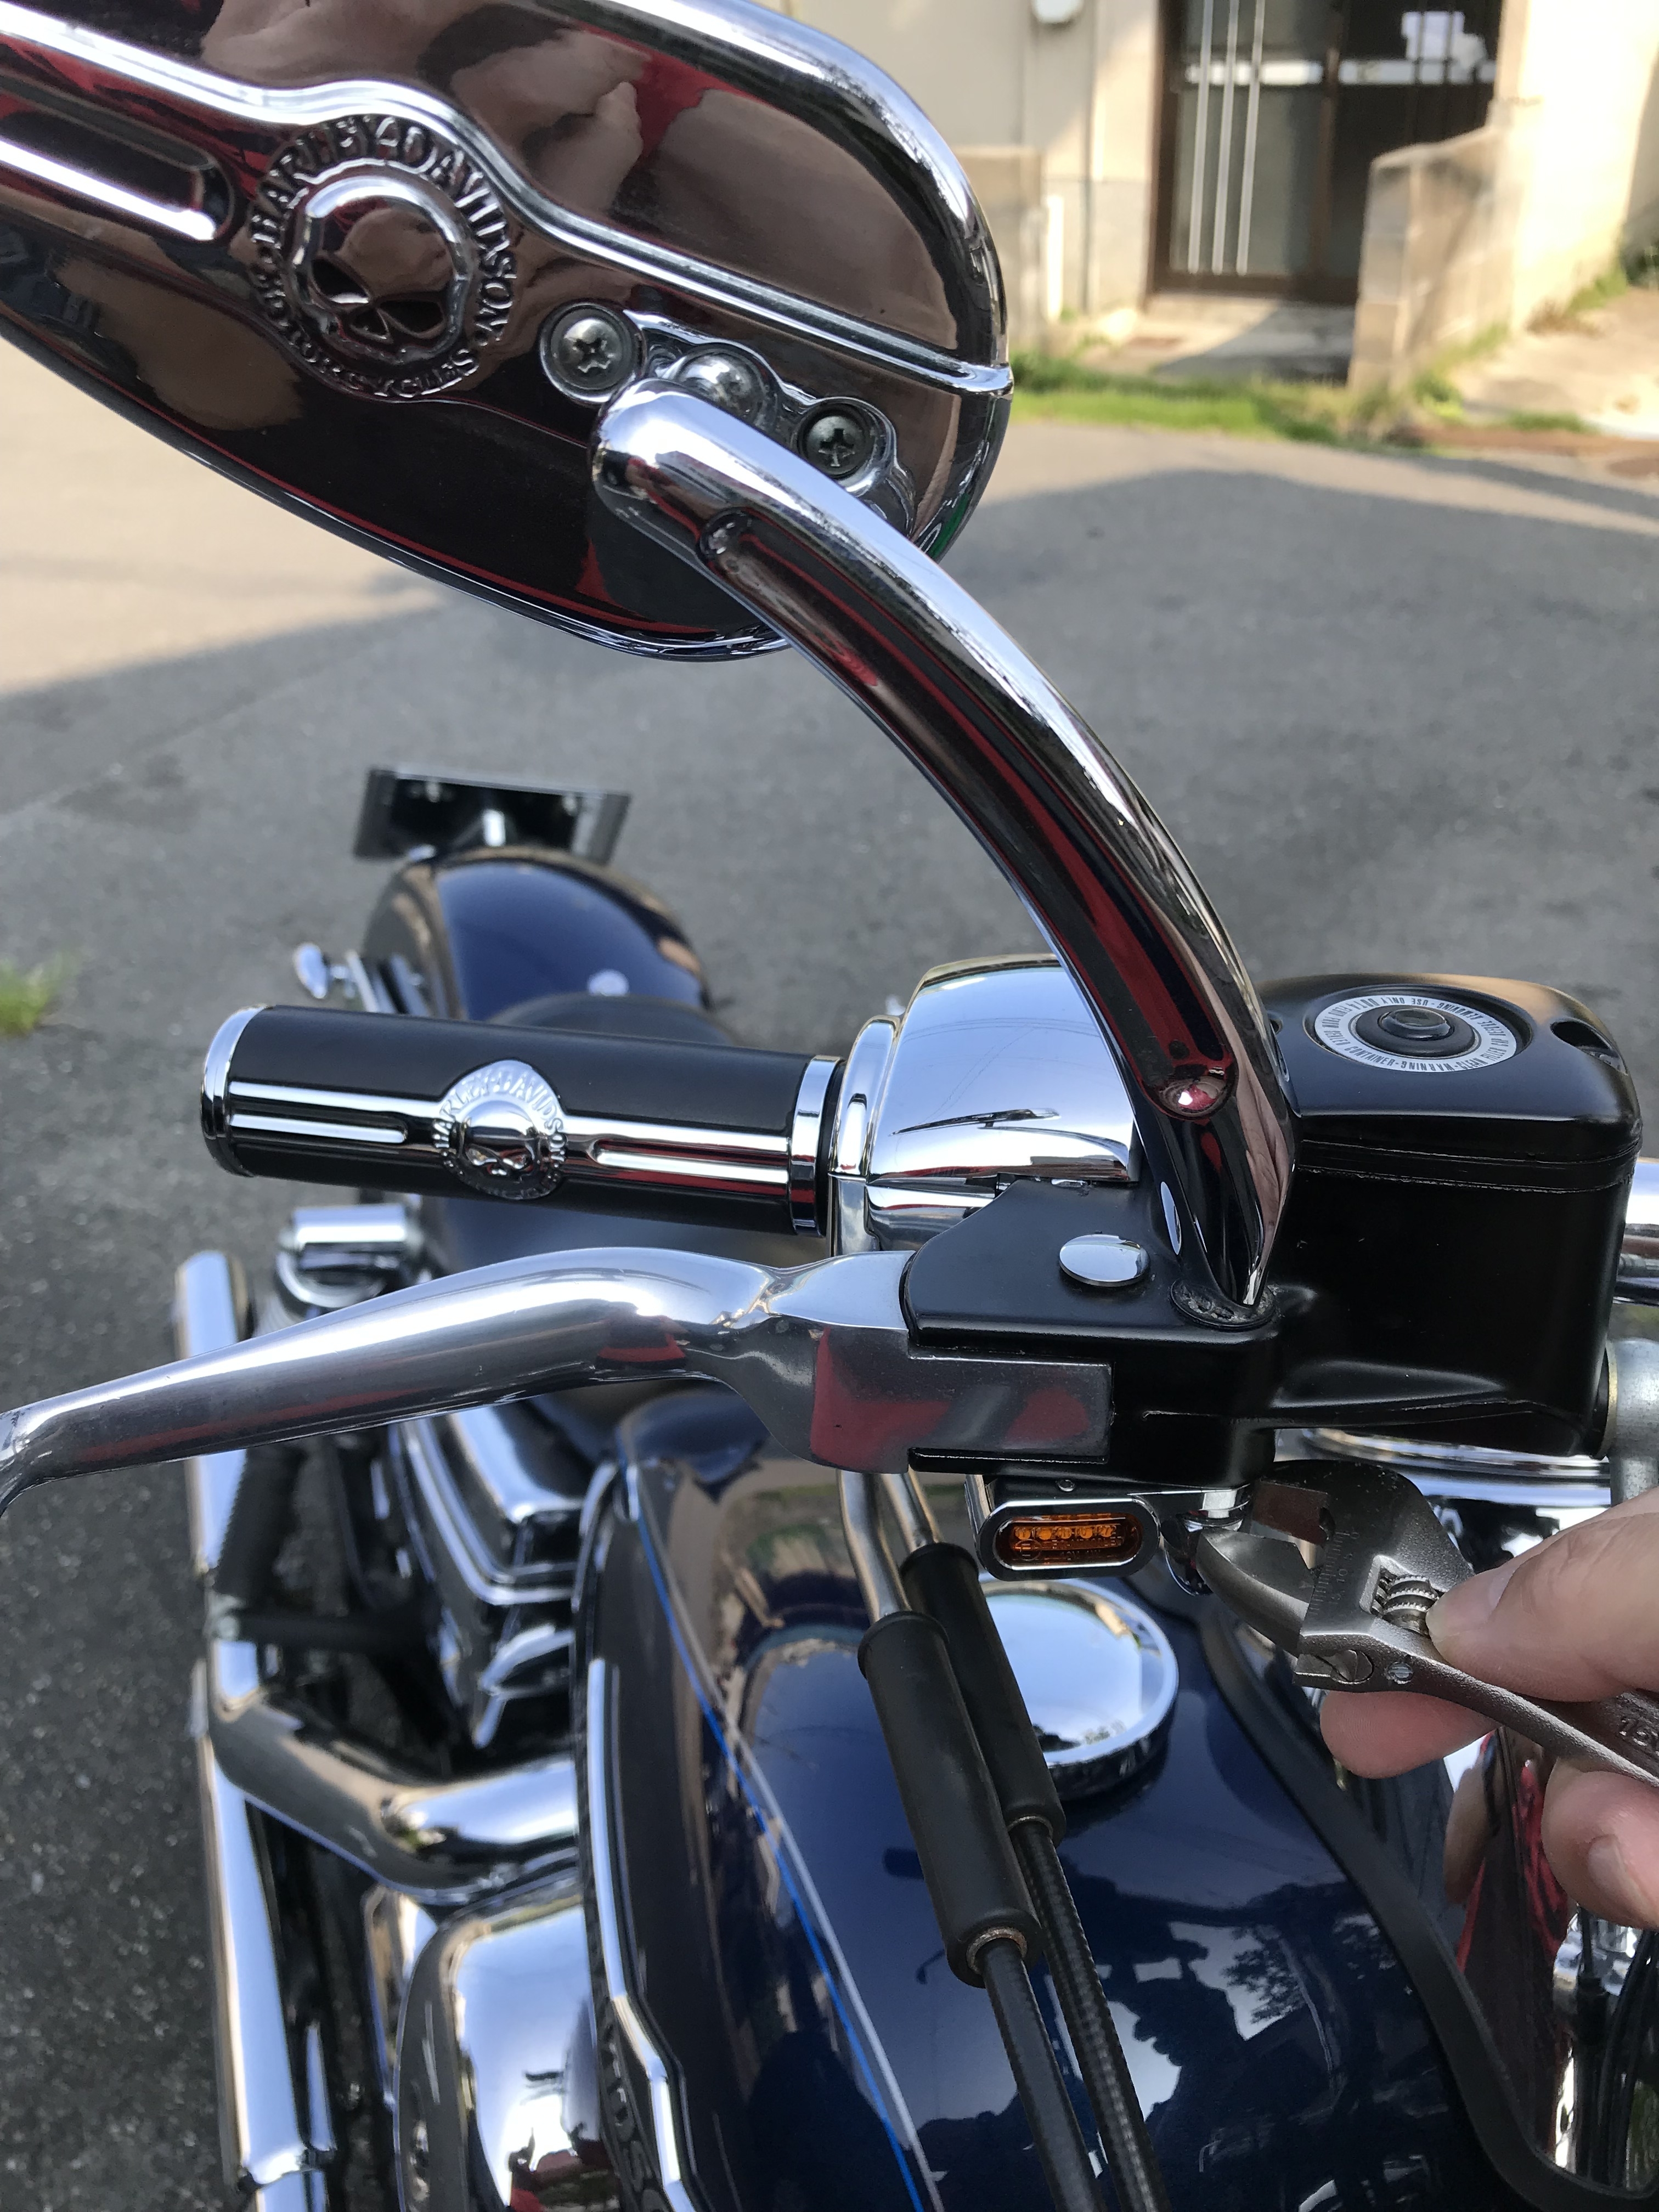 replace-the-lever-of-the-motorcycle-mirror-off.jpg